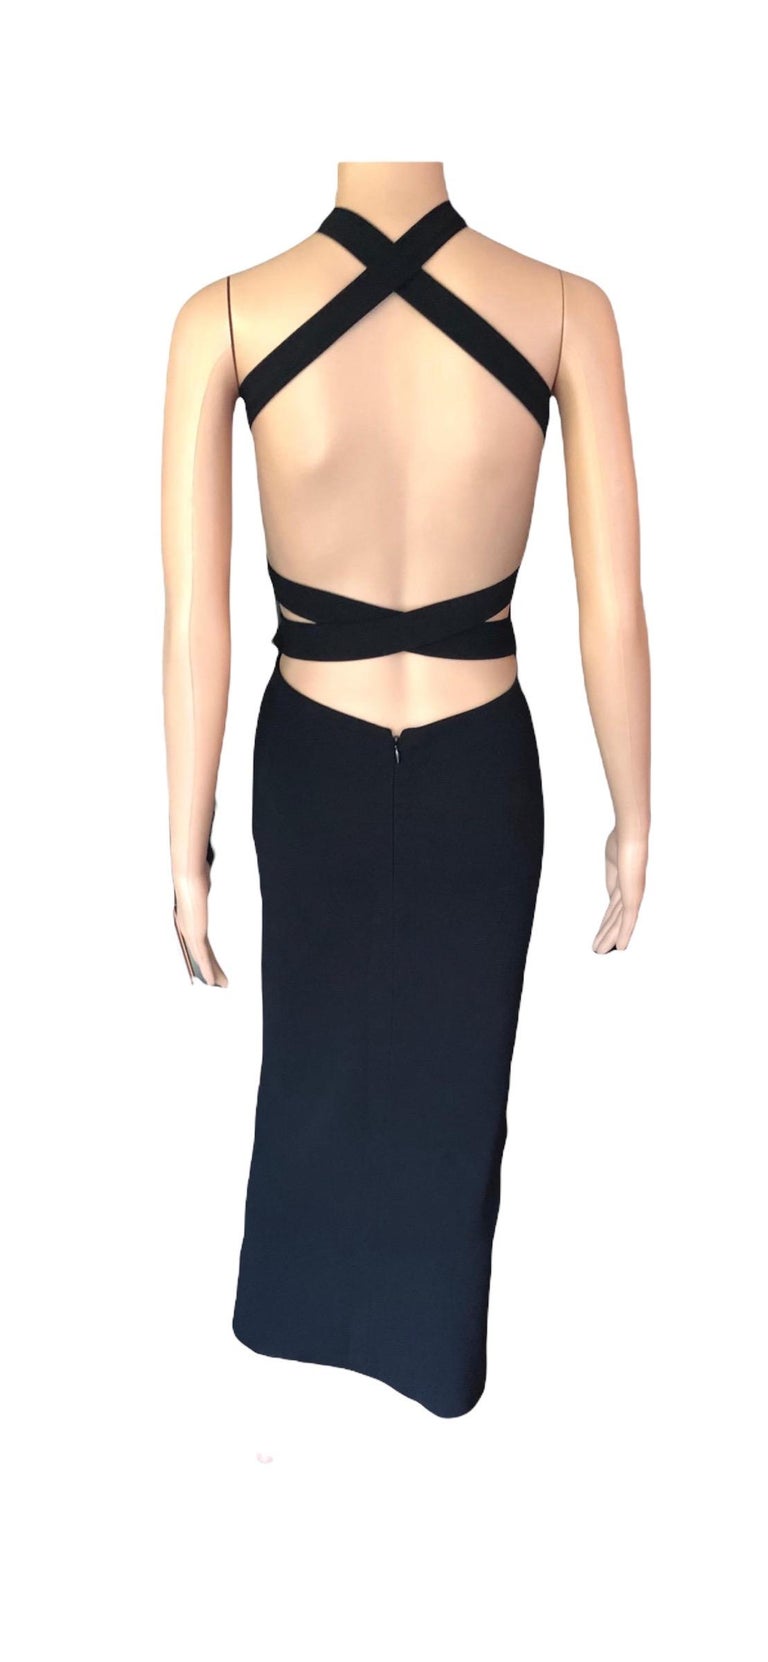 Dolce and Gabbana S/S 2001 Runway Backless Neck Tie Bodycon Black Dress ...